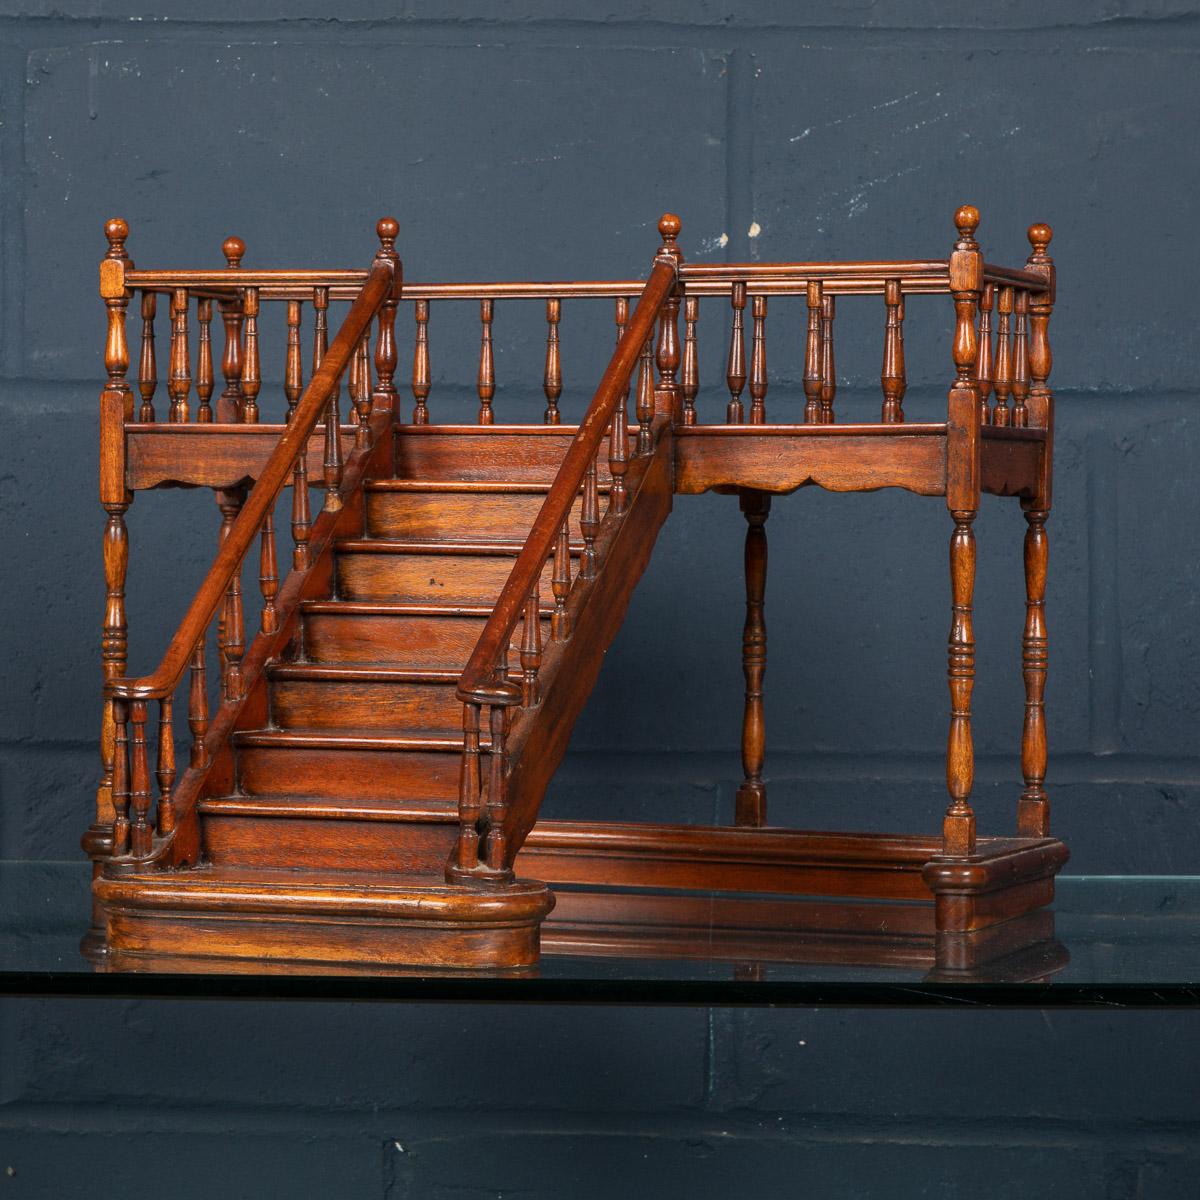 A superbly detailed miniature stairway made in England around the middle of the 19th century. This particular model is a single staircase leading to a balustraded gallery. Miniature staircases were produced by architects and furniture makers as